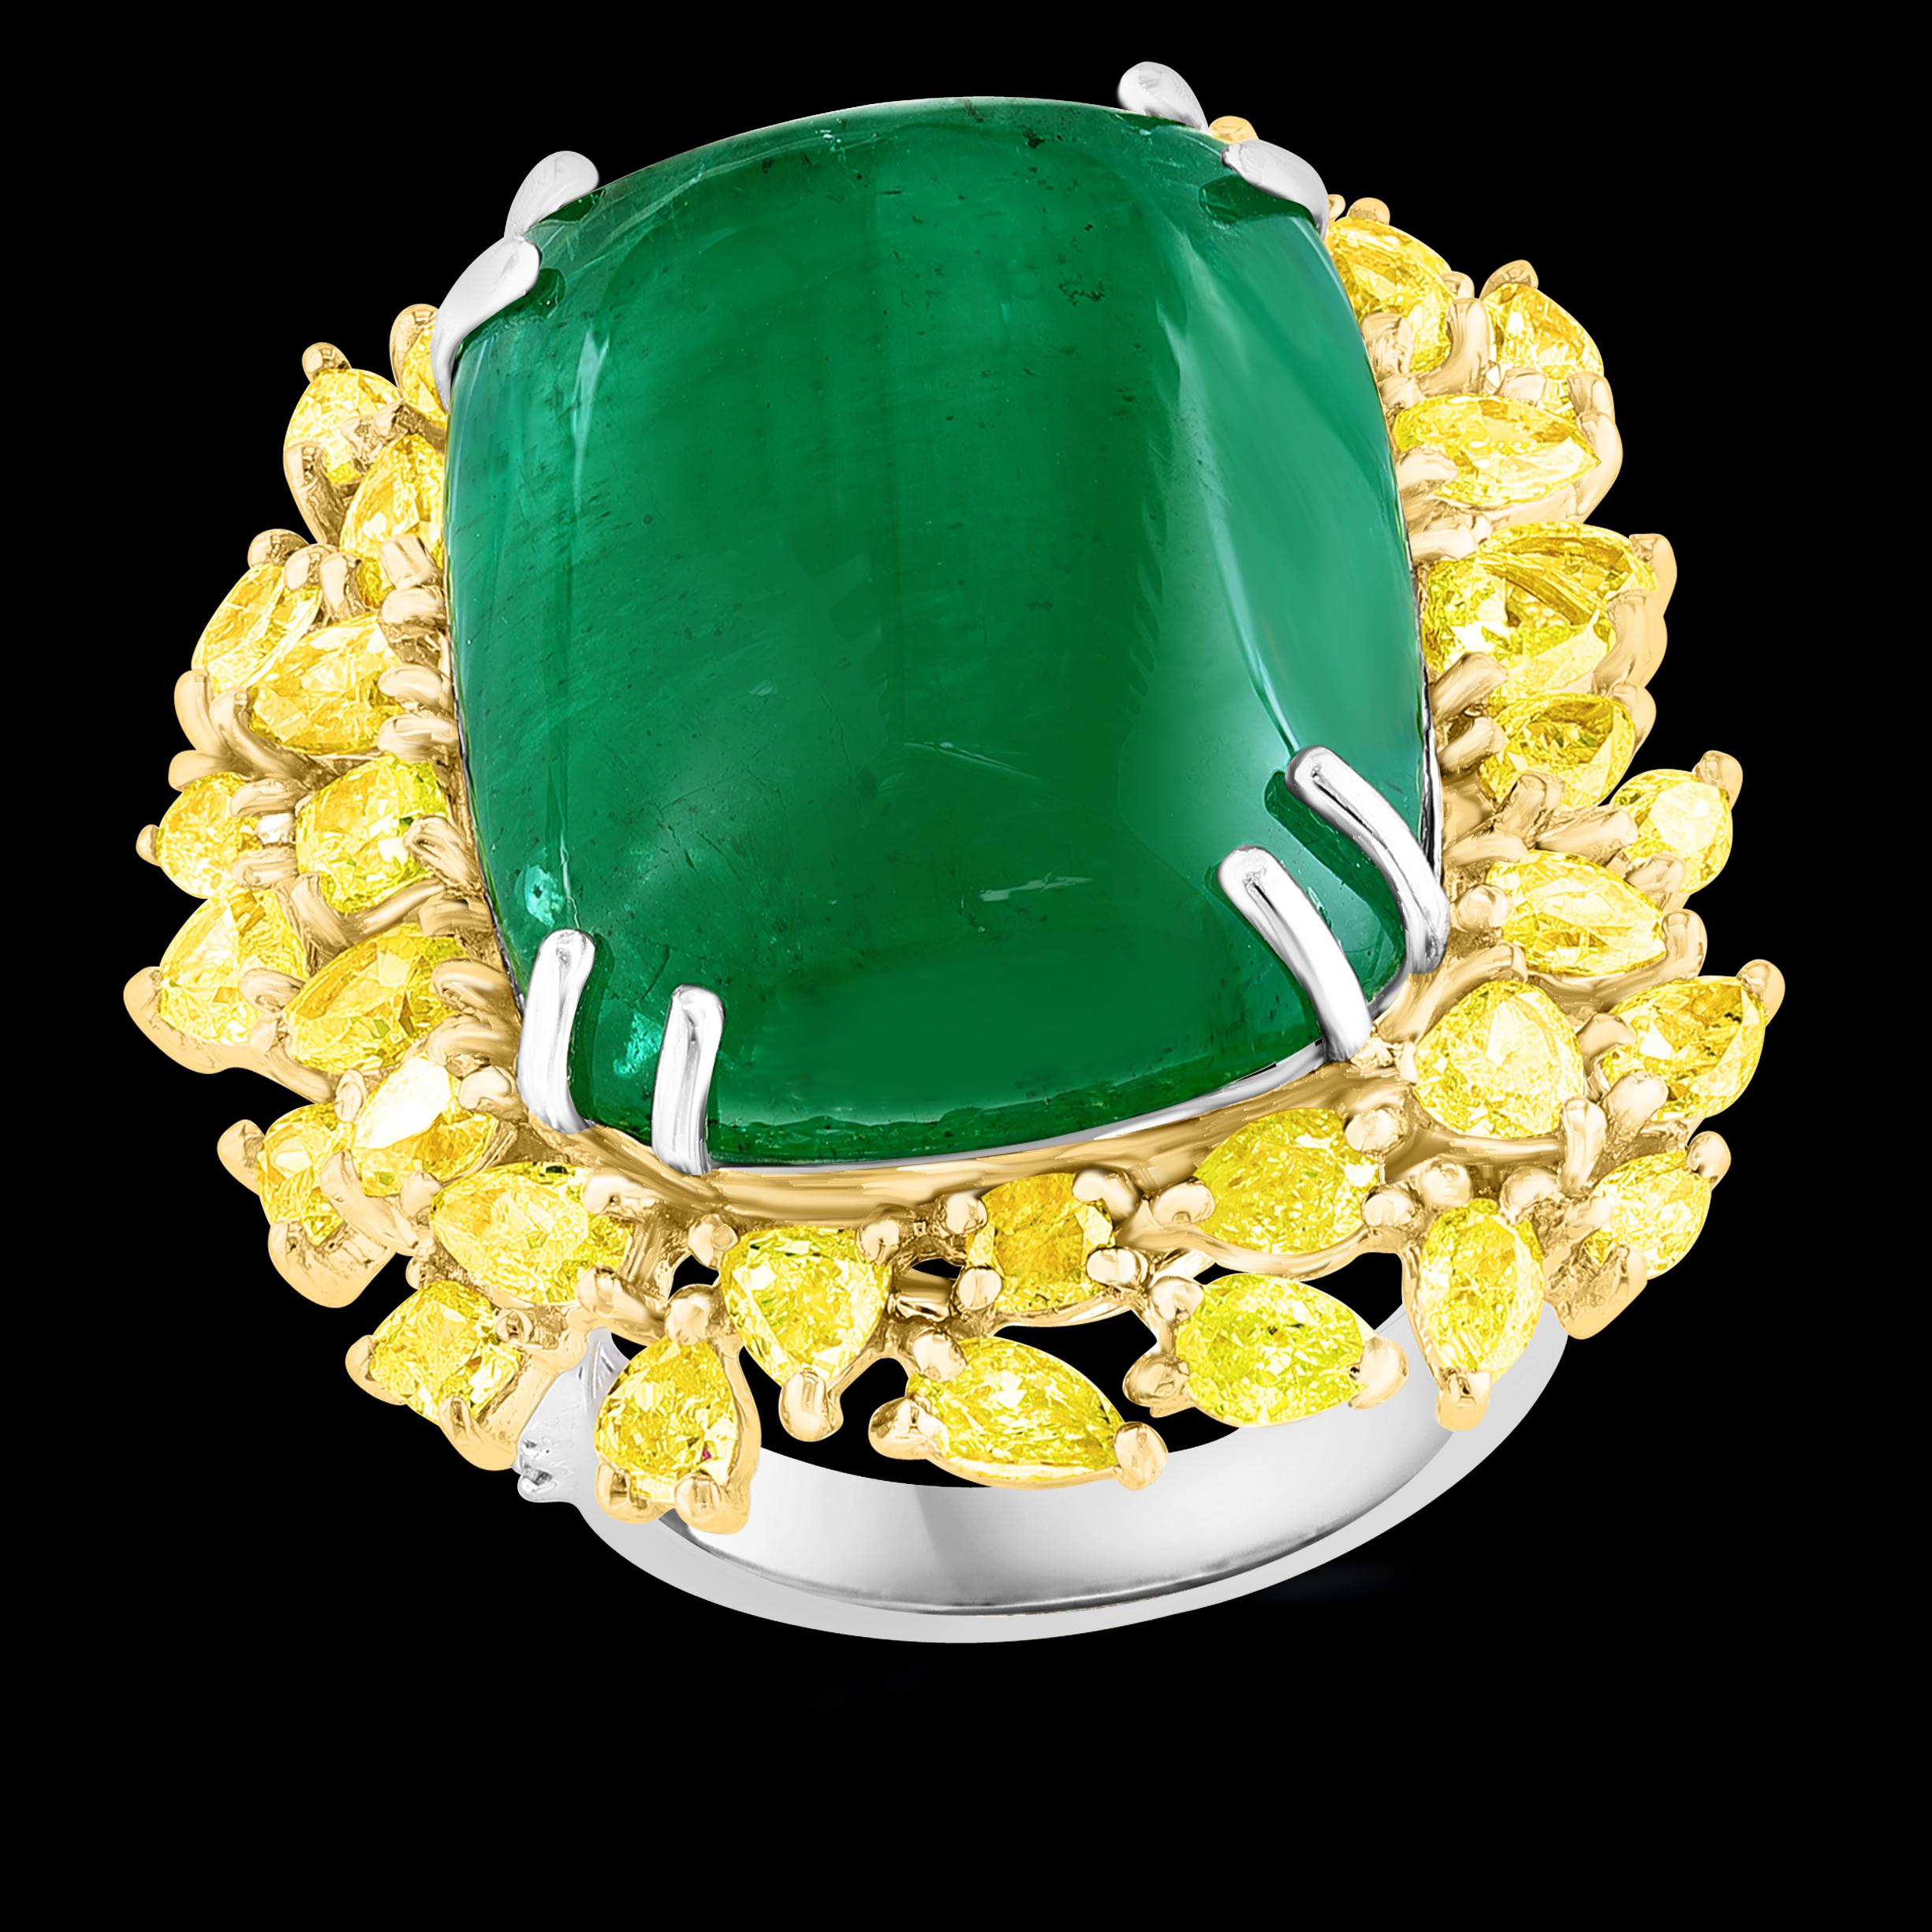 A classic, Cocktail ring 
27.89 Ct Natural Colombian Emerald Cabochon & 5.73 Ct  Yellow Diamond Ring 18 Karat two tone gold 
Exact  27.89  Carat Natural Cabochon Emerald Ring set in 18 Karat Yellow and white  Gold with 5.73 ct of yellow diamonds